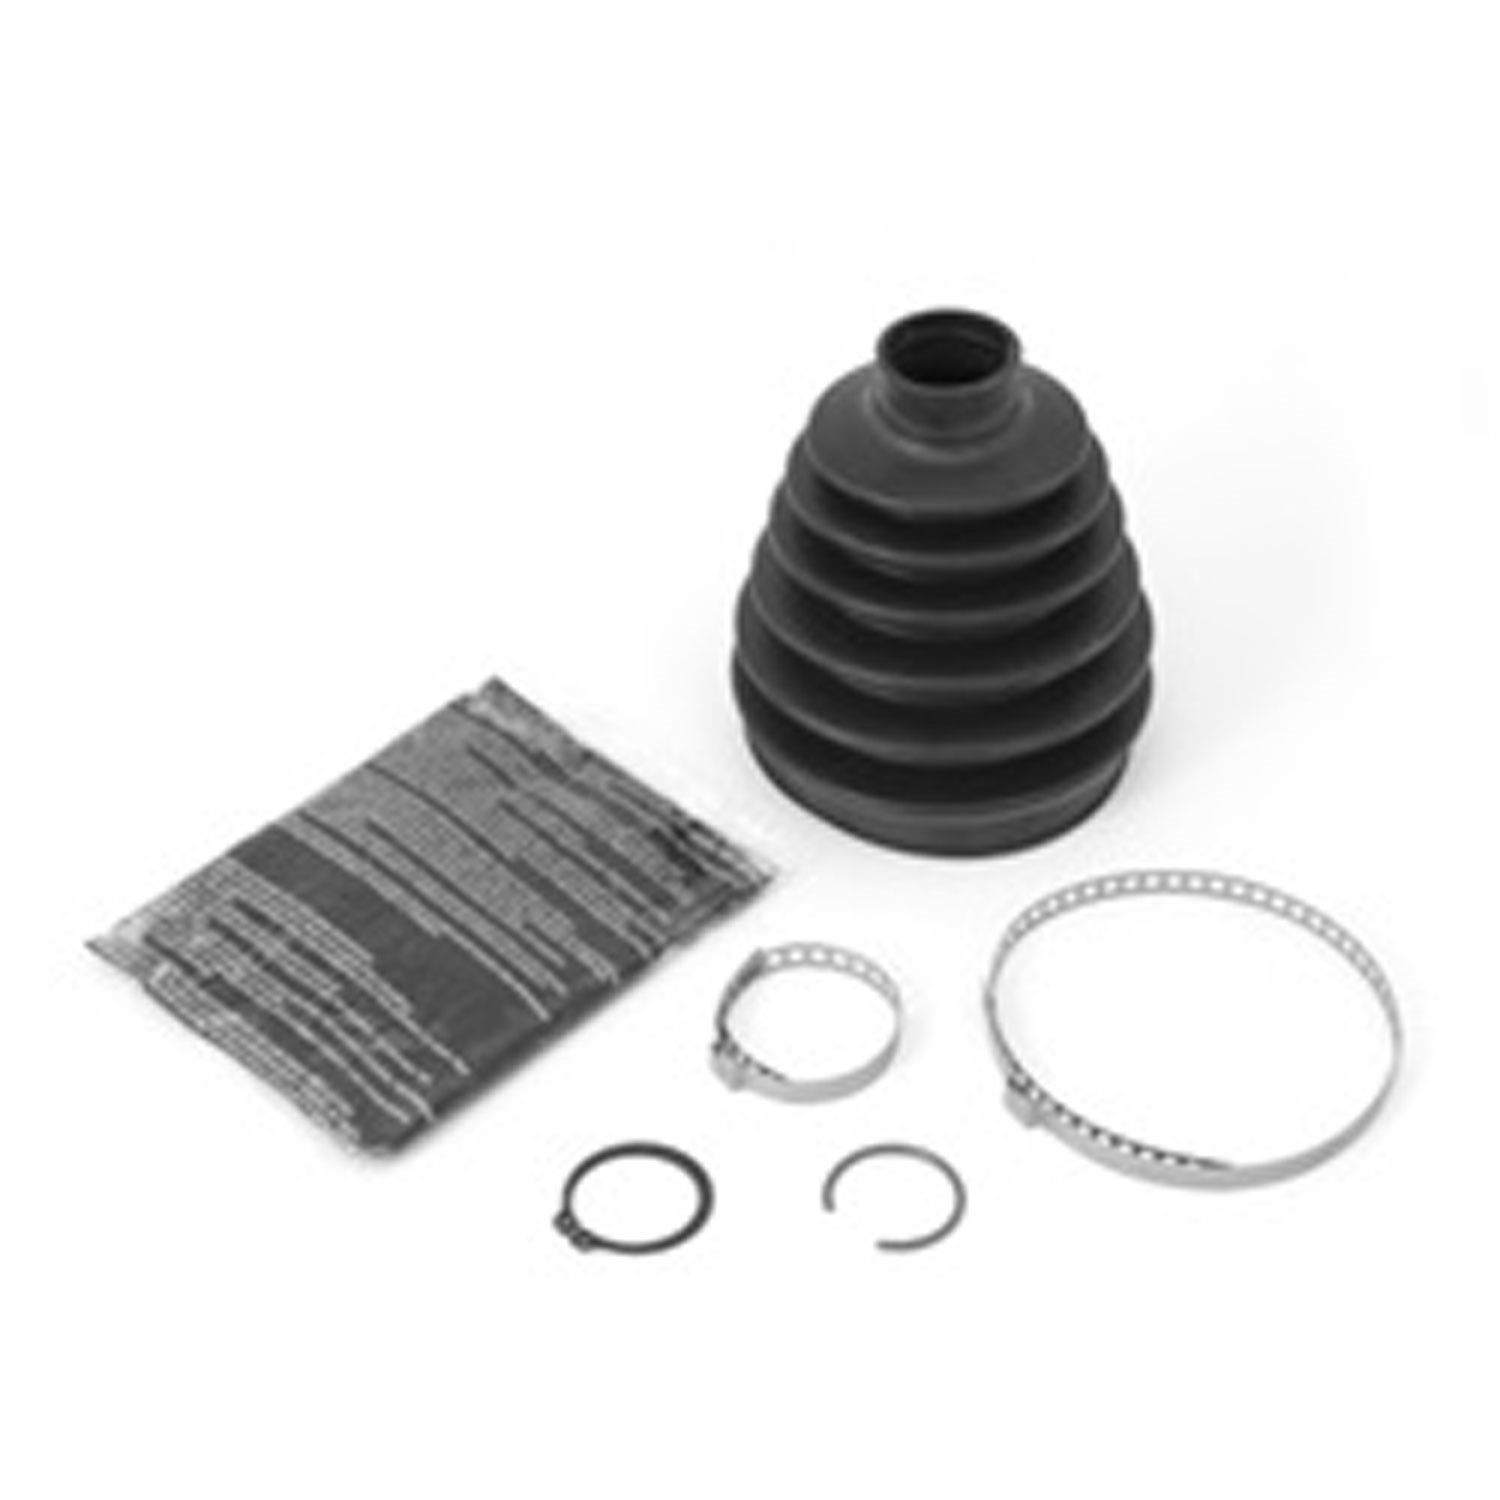 This front outer axle CV boot kit for Super Dana 30 from Omix-ADA fits the left or right side of 02-07 Jeep Liberty KJ .